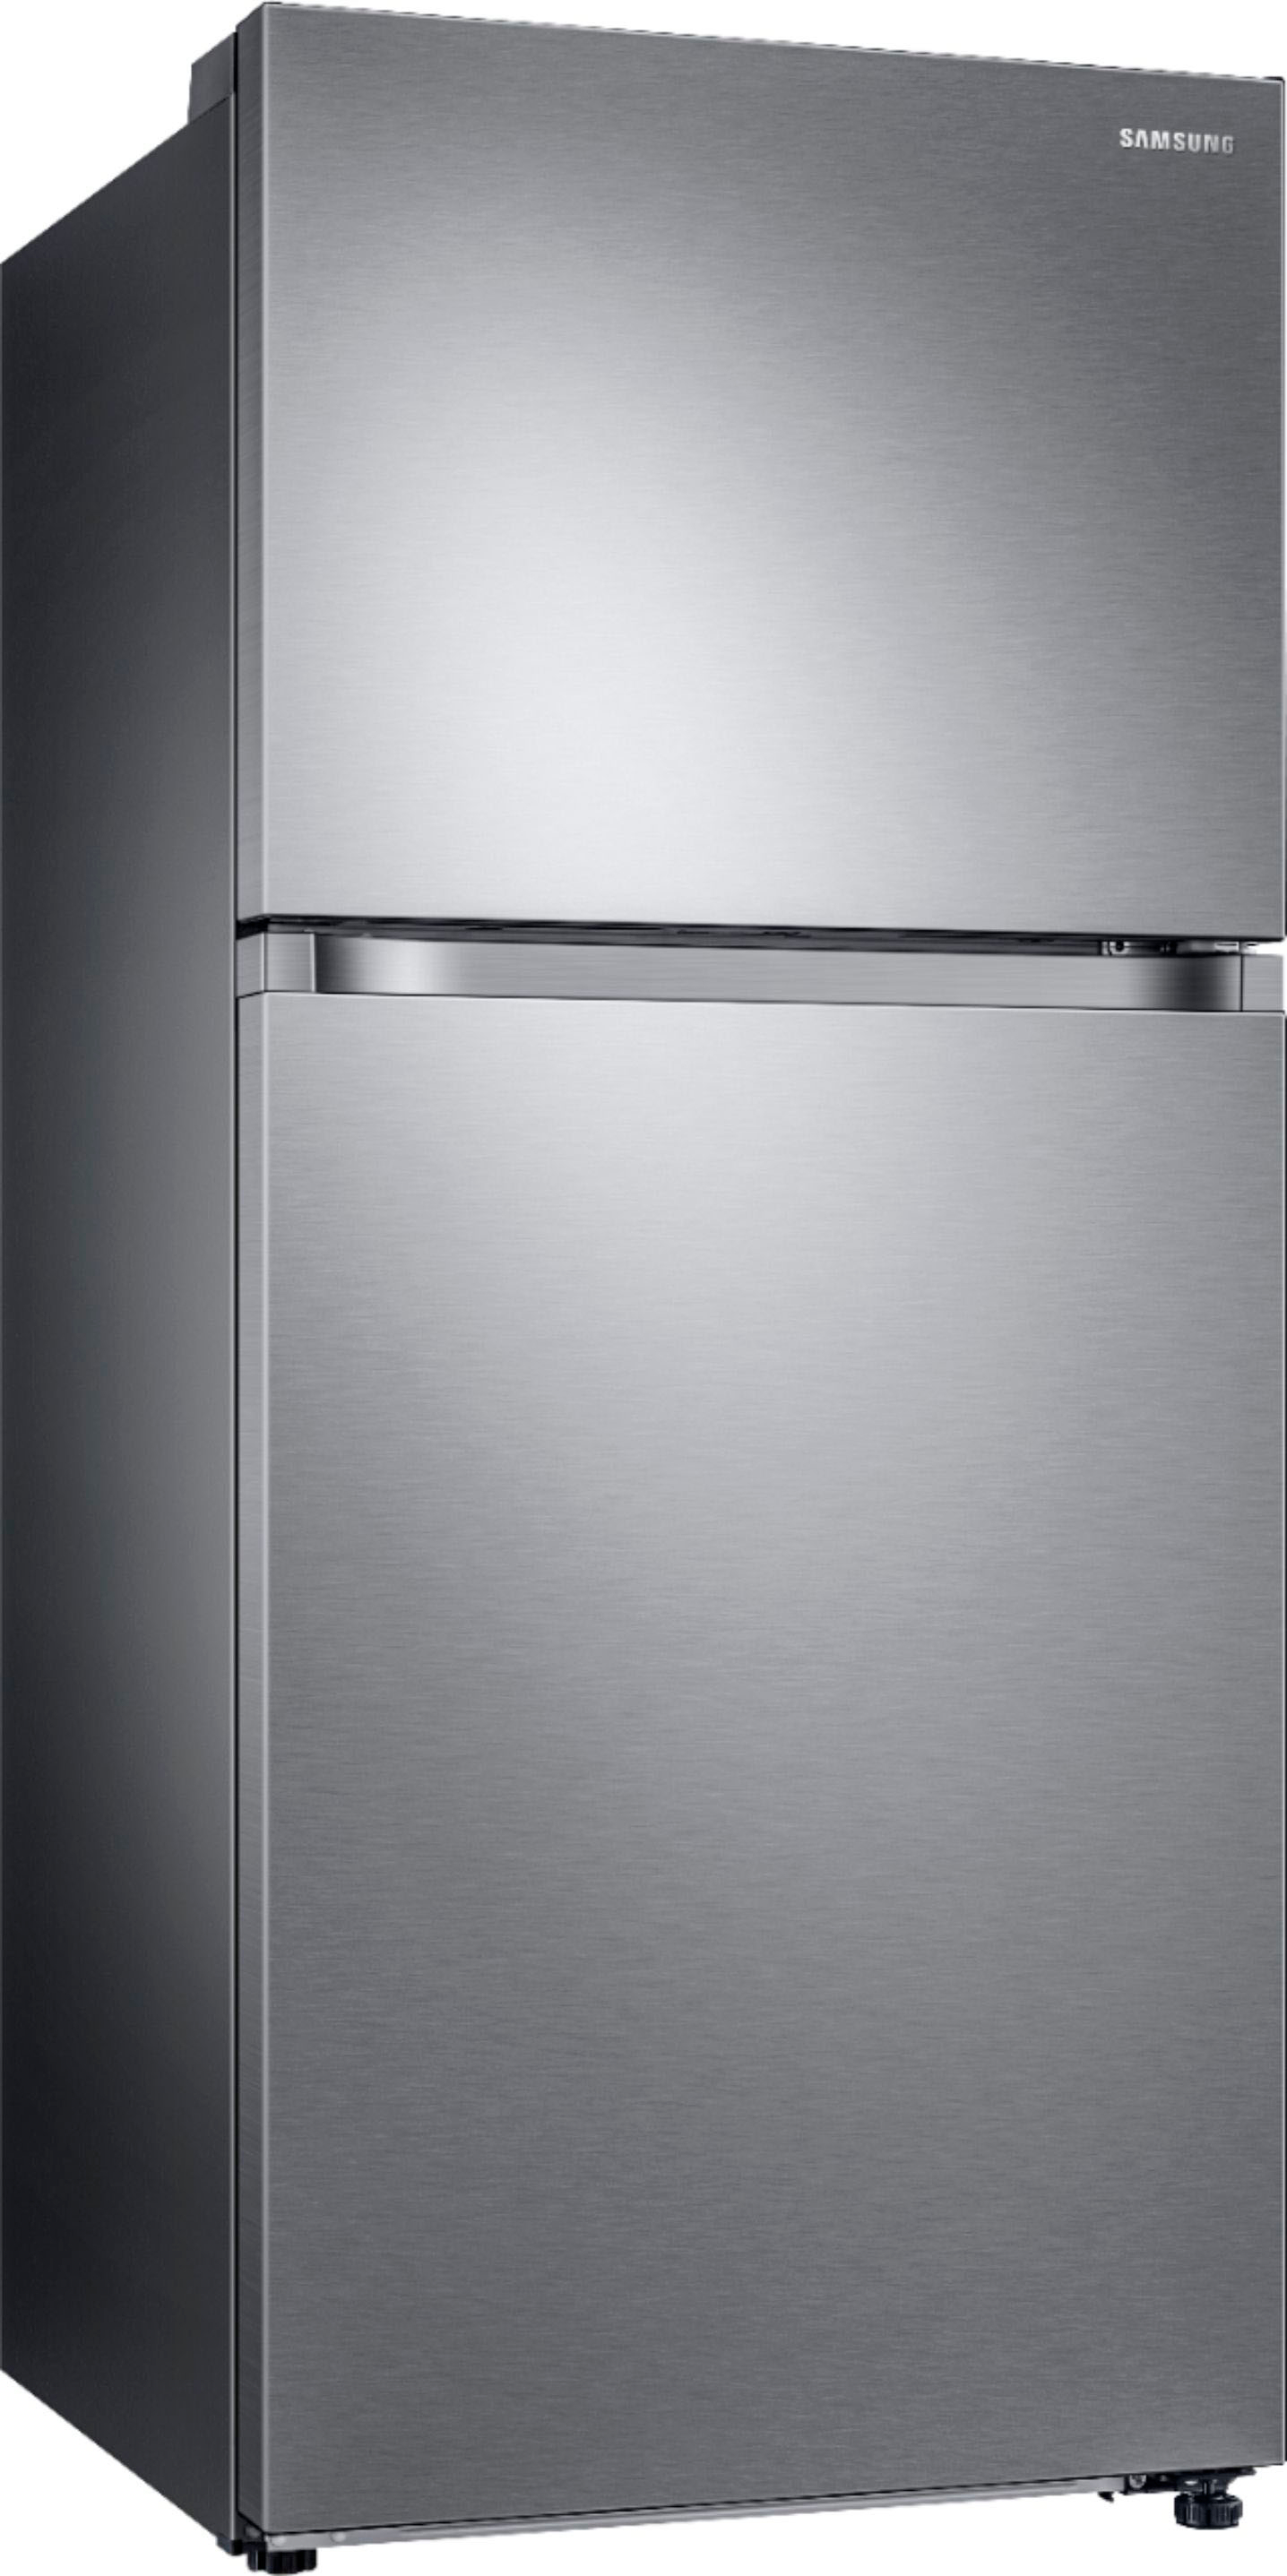 Angle View: Samsung - Geek Squad Certified Refurbished 17.6 Cu. Ft. Top-Freezer Refrigerator with  FlexZone and Ice Maker - Stainless steel